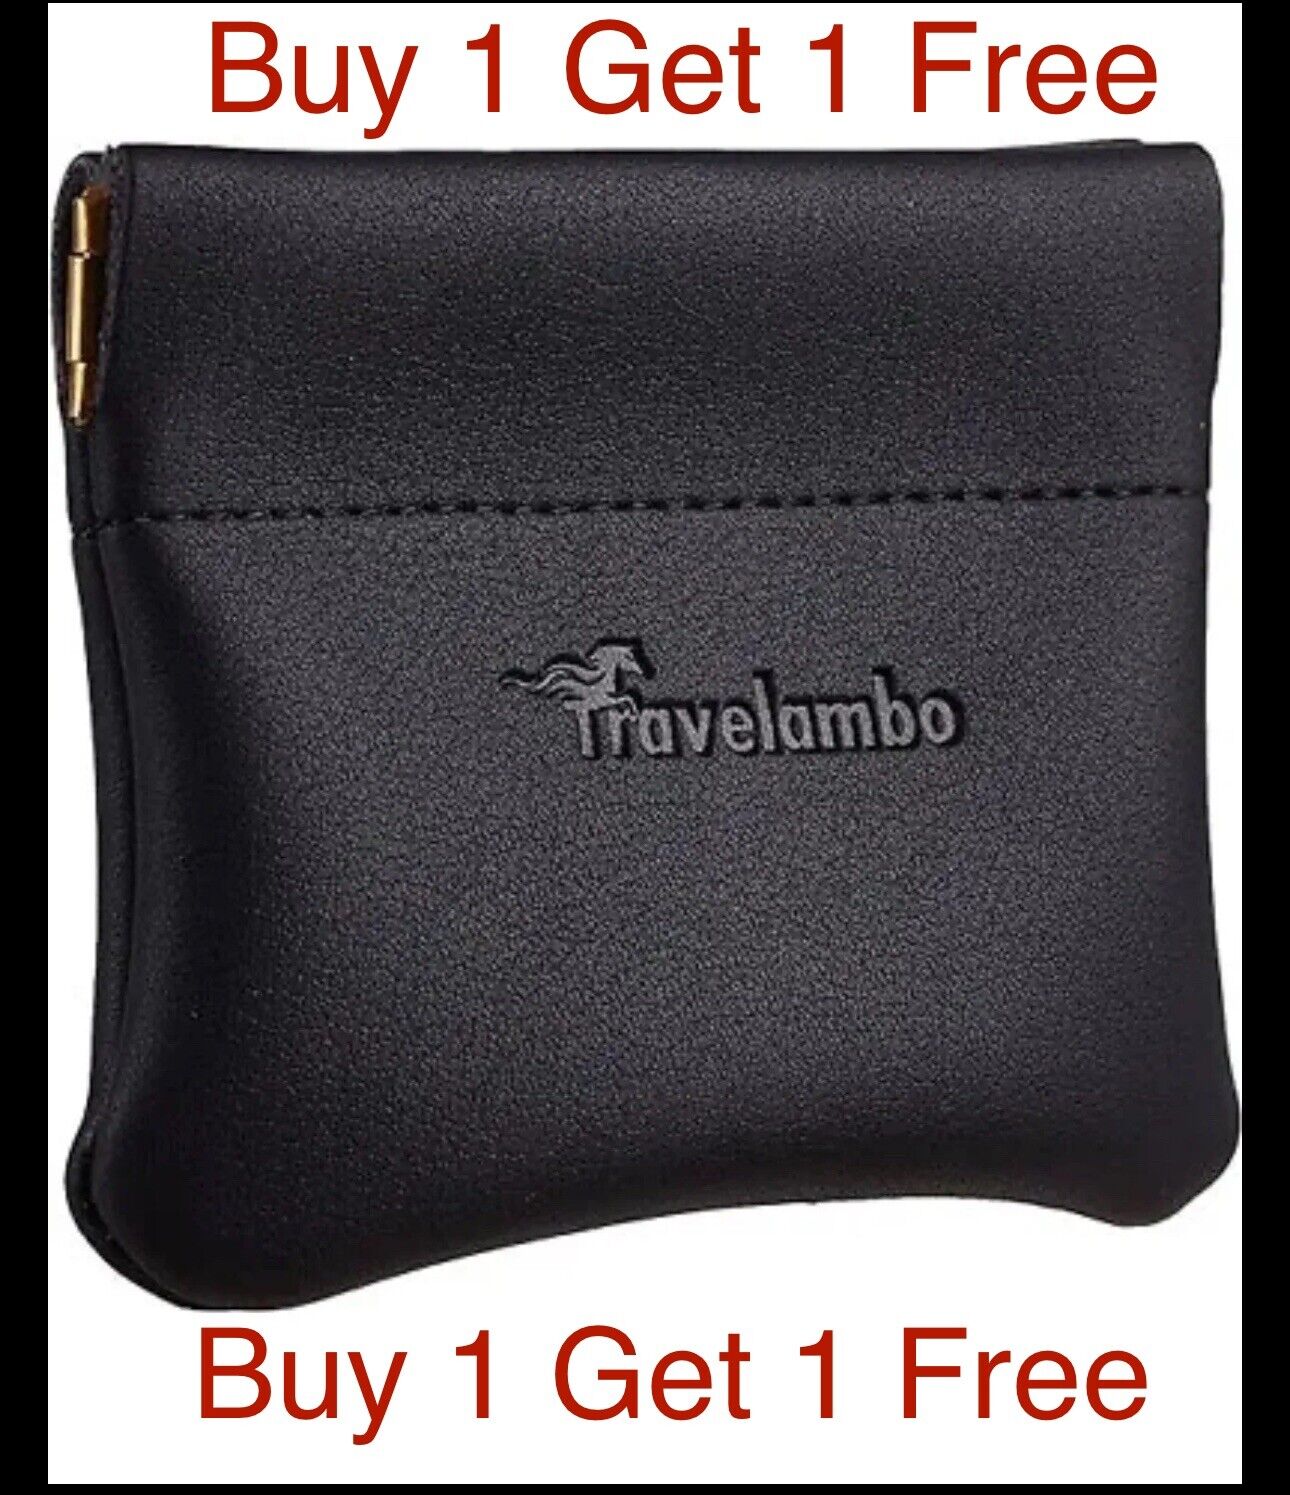 Travelambo Leather Squeeze Coin Purse Pouch Change Holder For Men & Women BOGO